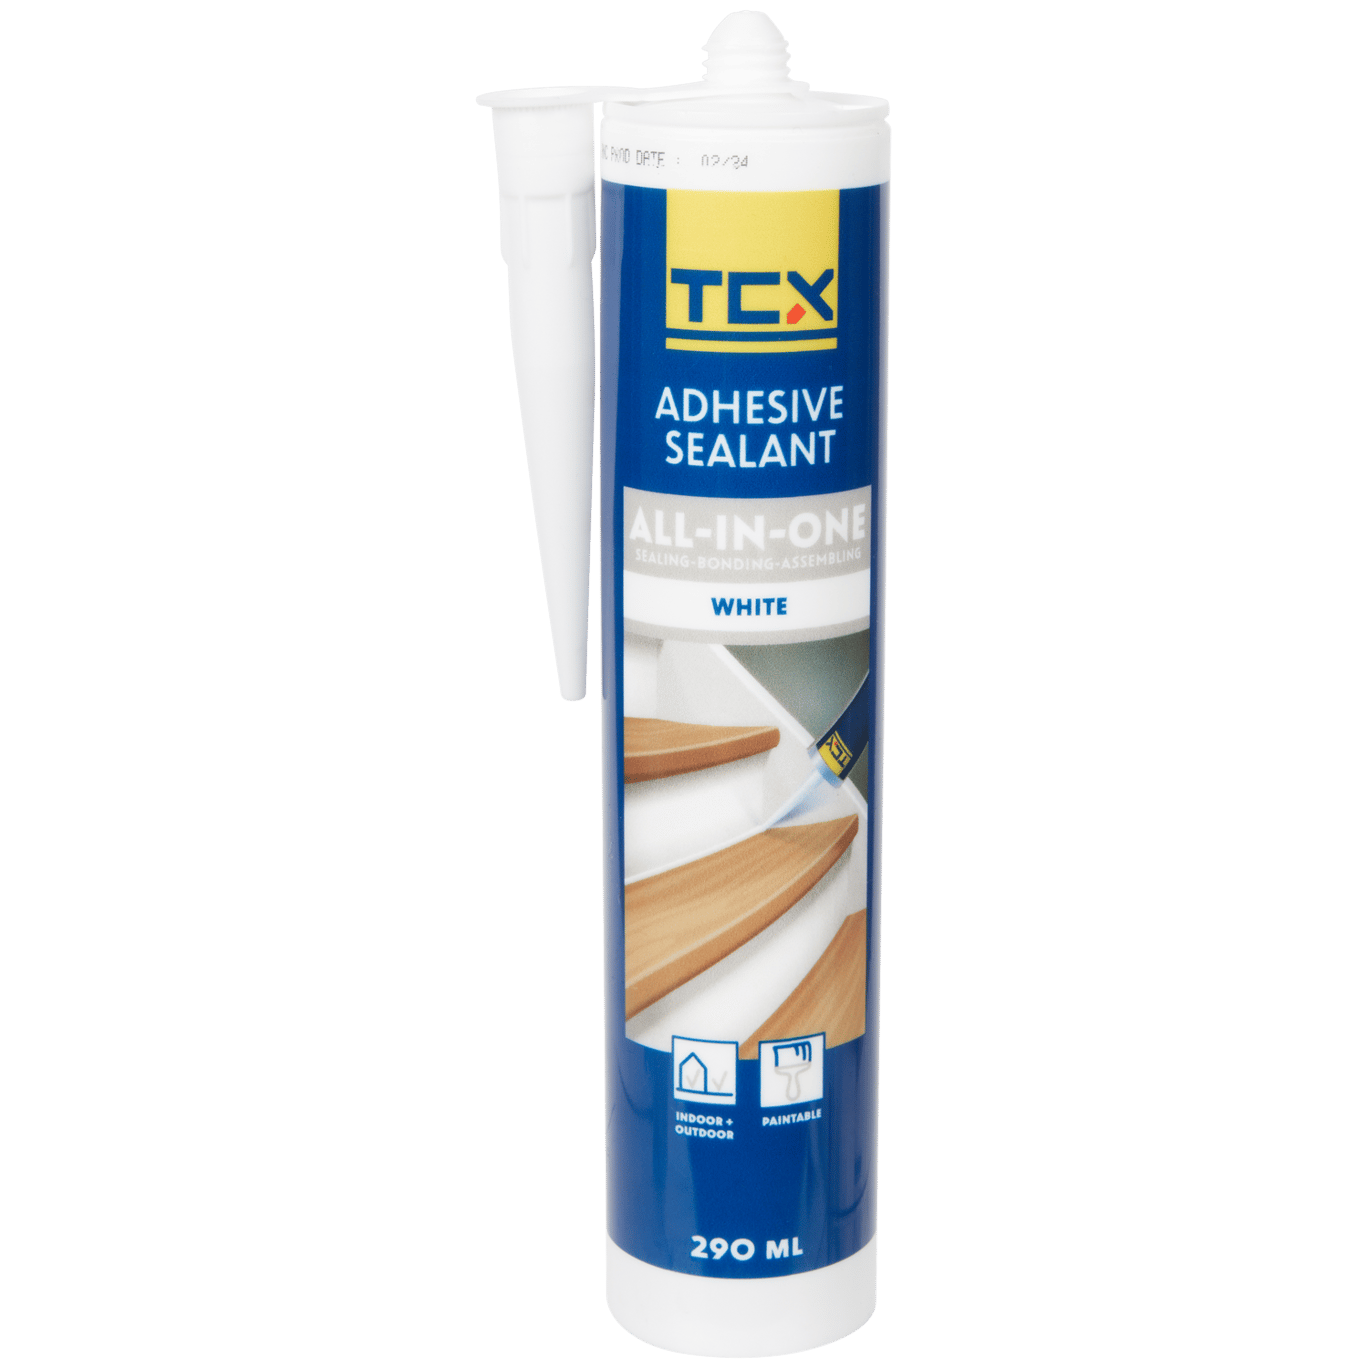 Mastic colle TCX All-In-One